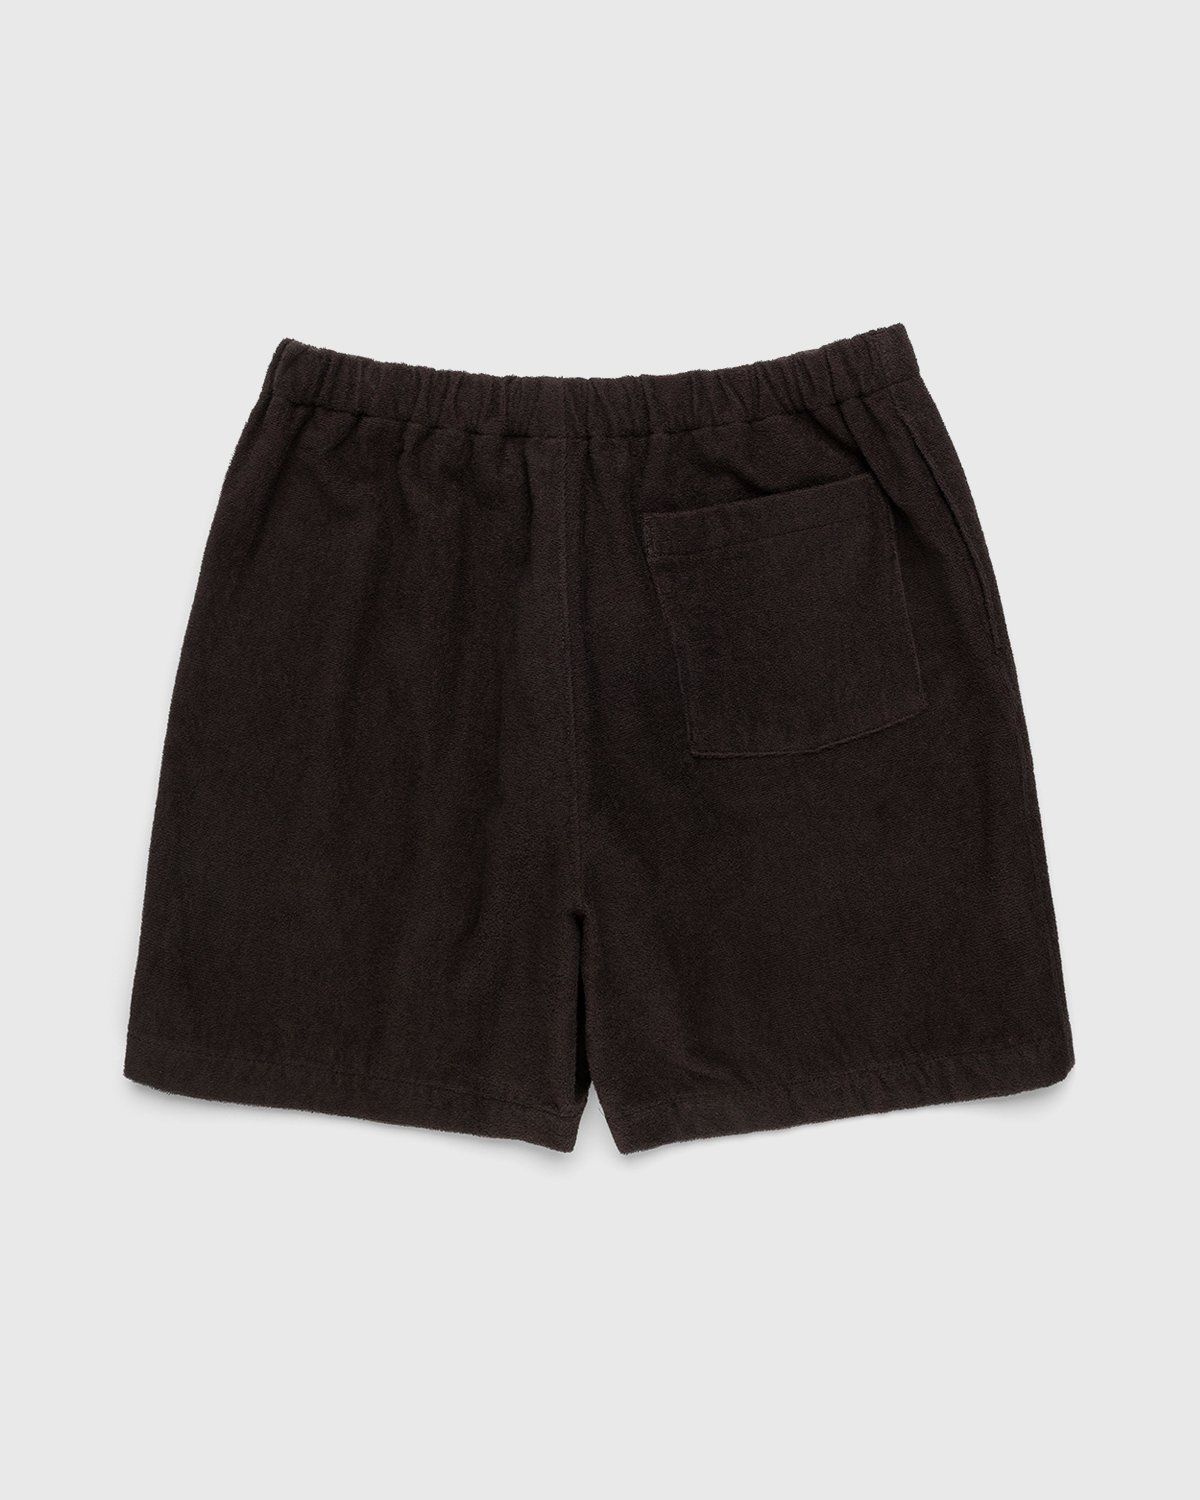 Auralee – Cotton Terry Cloth Shorts Brown - Shorts - Brown - Image 2